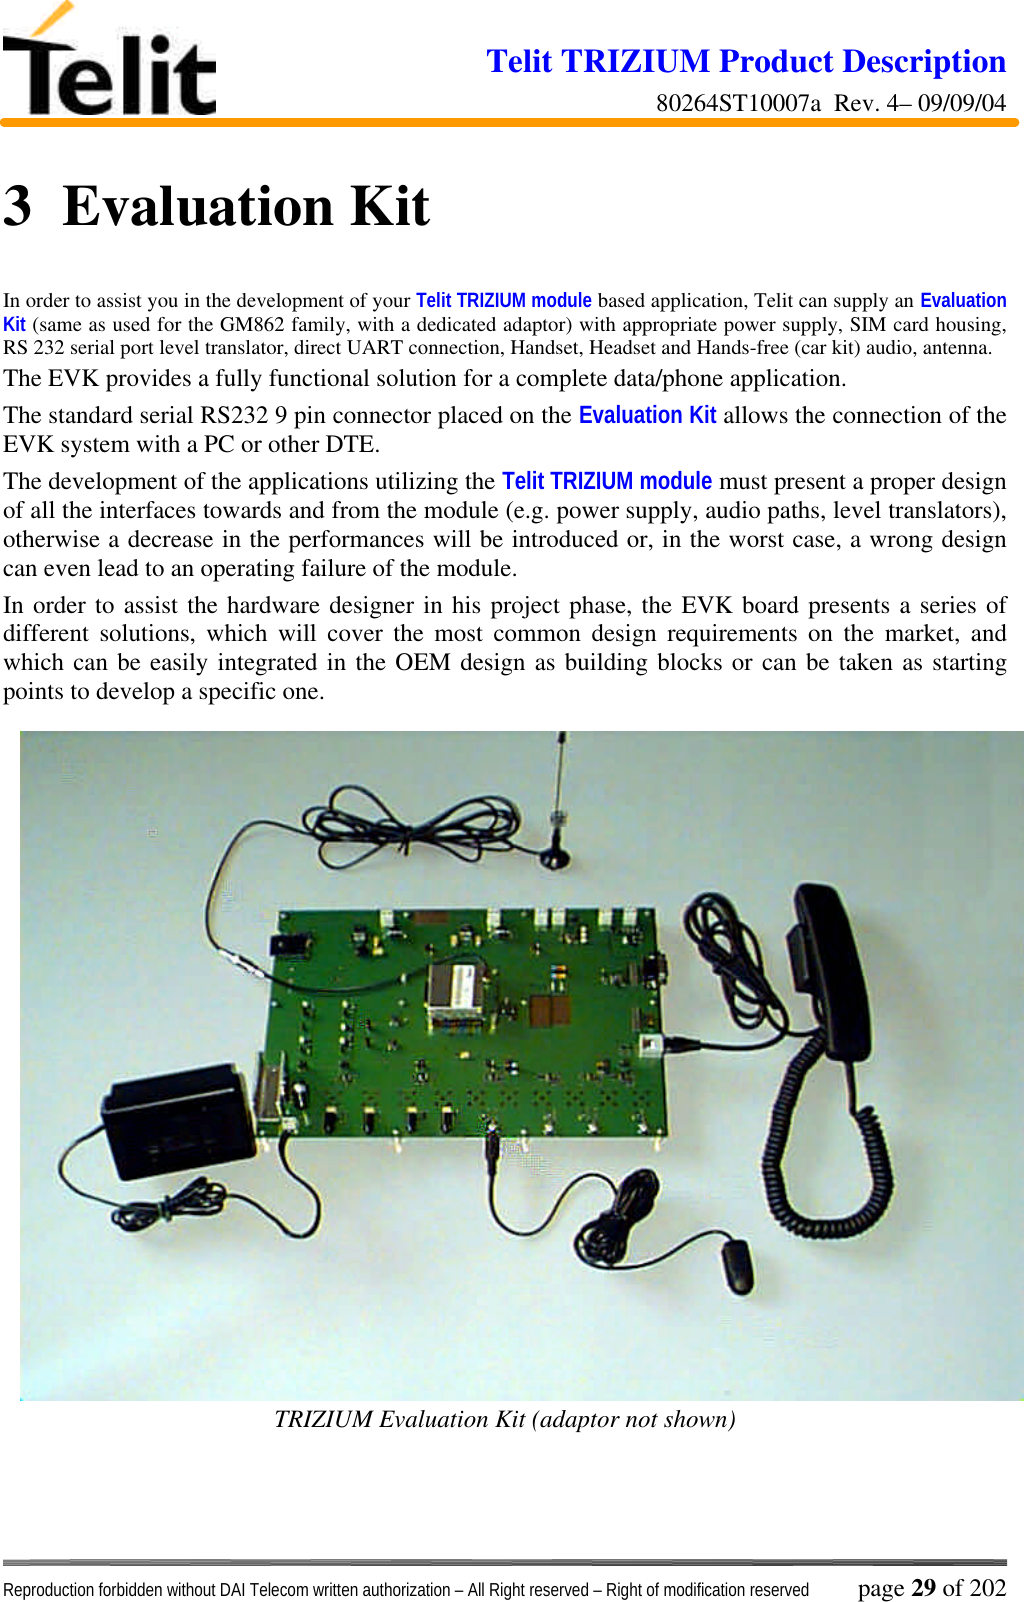 Telit TRIZIUM Product Description80264ST10007a  Rev. 4– 09/09/04Reproduction forbidden without DAI Telecom written authorization – All Right reserved – Right of modification reserved page 29 of 2023  Evaluation KitIn order to assist you in the development of your Telit TRIZIUM module based application, Telit can supply an EvaluationKit (same as used for the GM862 family, with a dedicated adaptor) with appropriate power supply, SIM card housing,RS 232 serial port level translator, direct UART connection, Handset, Headset and Hands-free (car kit) audio, antenna.The EVK provides a fully functional solution for a complete data/phone application.The standard serial RS232 9 pin connector placed on the Evaluation Kit allows the connection of theEVK system with a PC or other DTE.The development of the applications utilizing the Telit TRIZIUM module must present a proper designof all the interfaces towards and from the module (e.g. power supply, audio paths, level translators),otherwise a decrease in the performances will be introduced or, in the worst case, a wrong designcan even lead to an operating failure of the module.In order to assist the hardware designer in his project phase, the EVK board presents a series ofdifferent solutions, which will cover the most common design requirements on the market, andwhich can be easily integrated in the OEM design as building blocks or can be taken as startingpoints to develop a specific one.TRIZIUM Evaluation Kit (adaptor not shown)